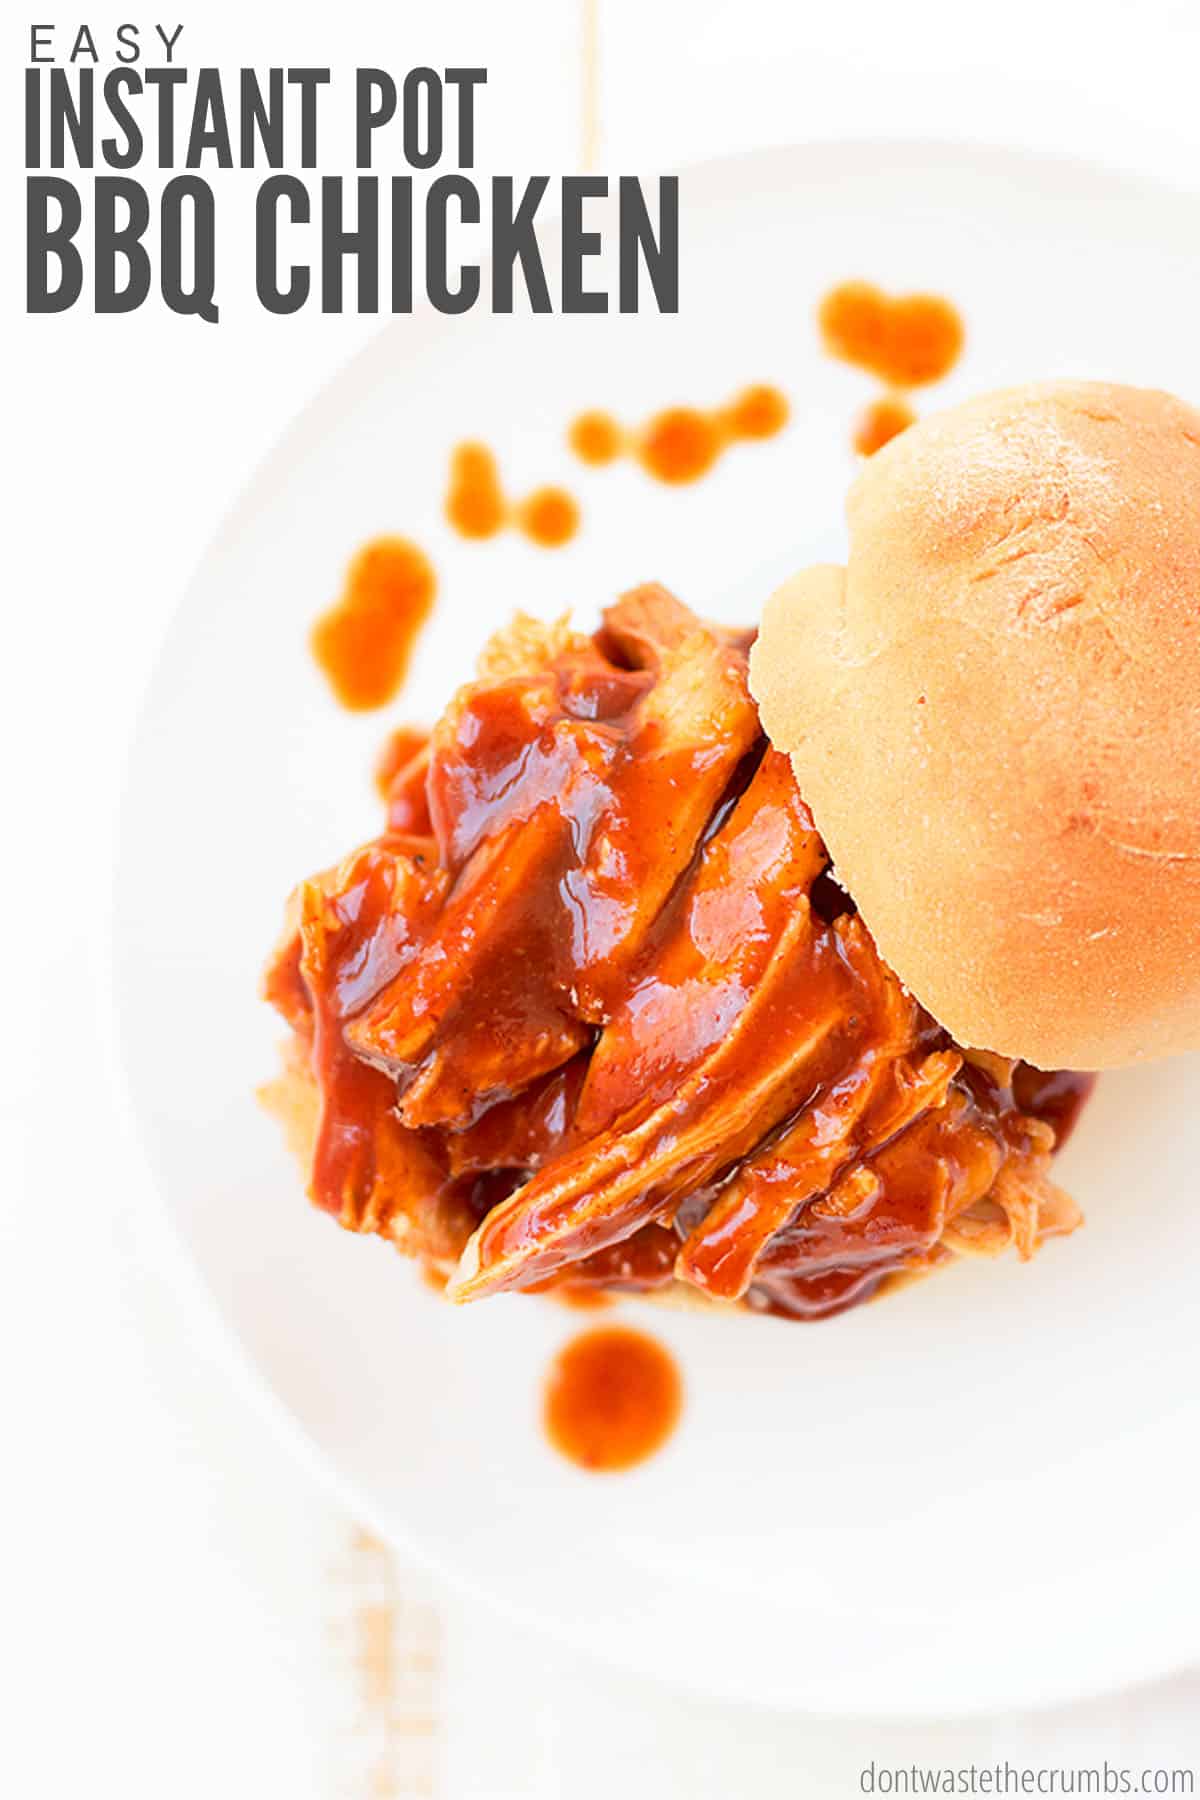 Barbecue chicken slathered in tangy barbecue sauce is topped by a homemade bun.